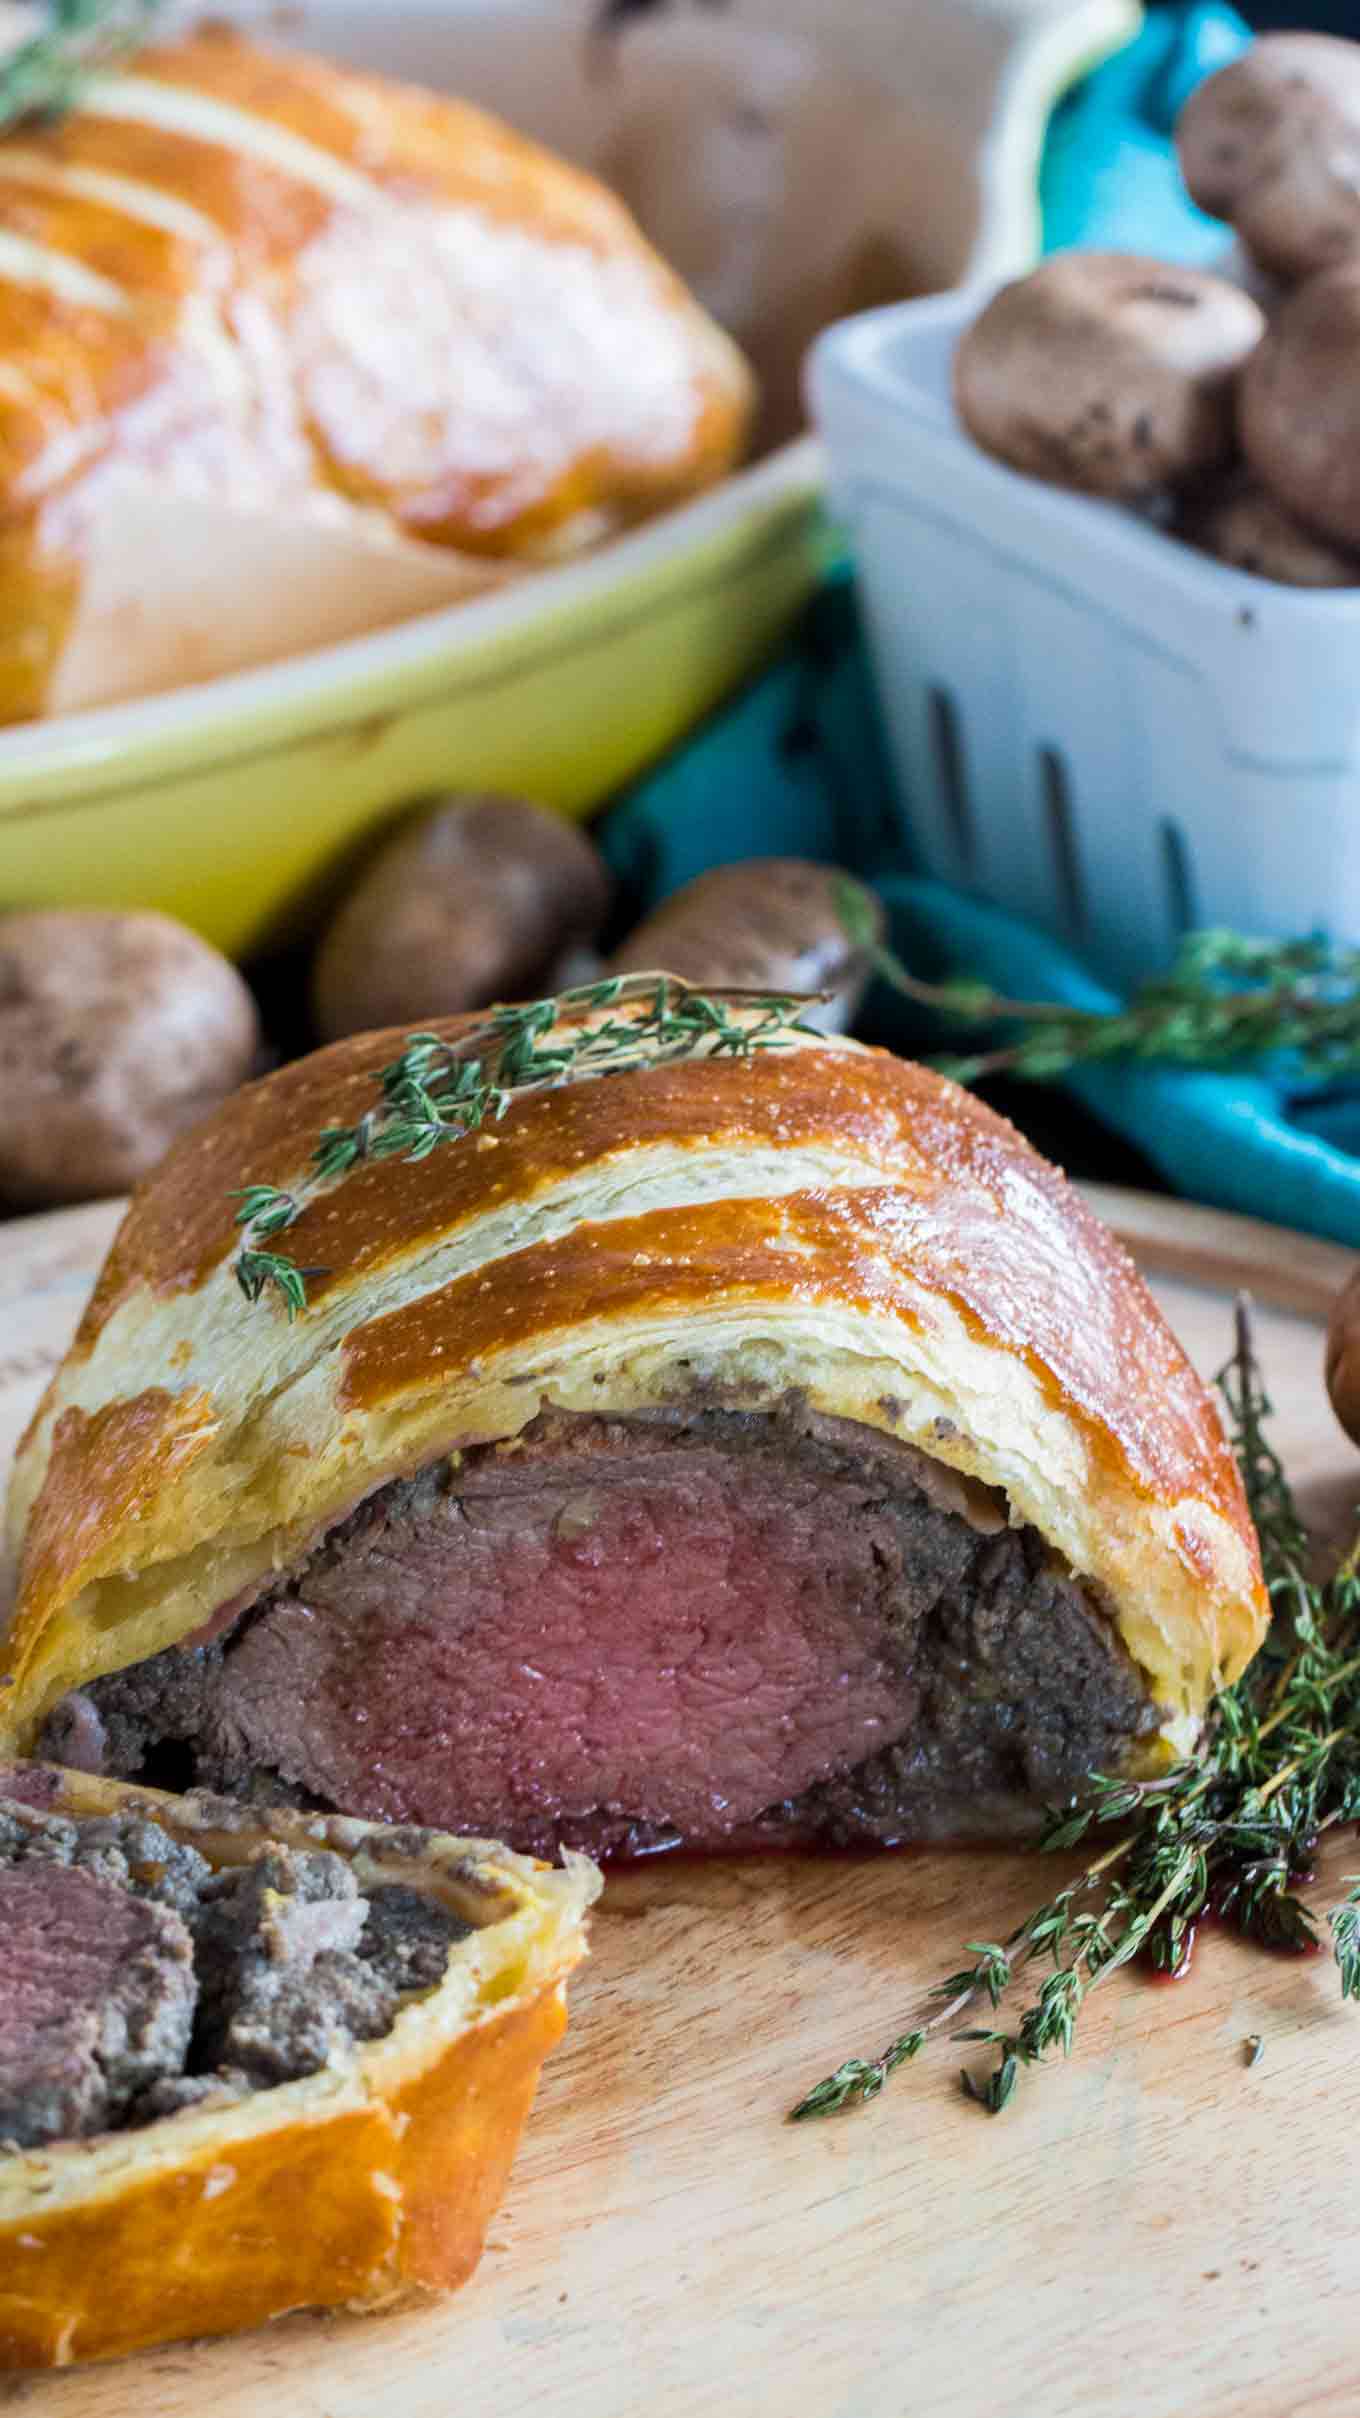 Perfect Beef Wellington cooked perfectly while wrapped in puff pastry, ham and the most amazing mushroom duxelles made with cognac duck liver mousse pate.